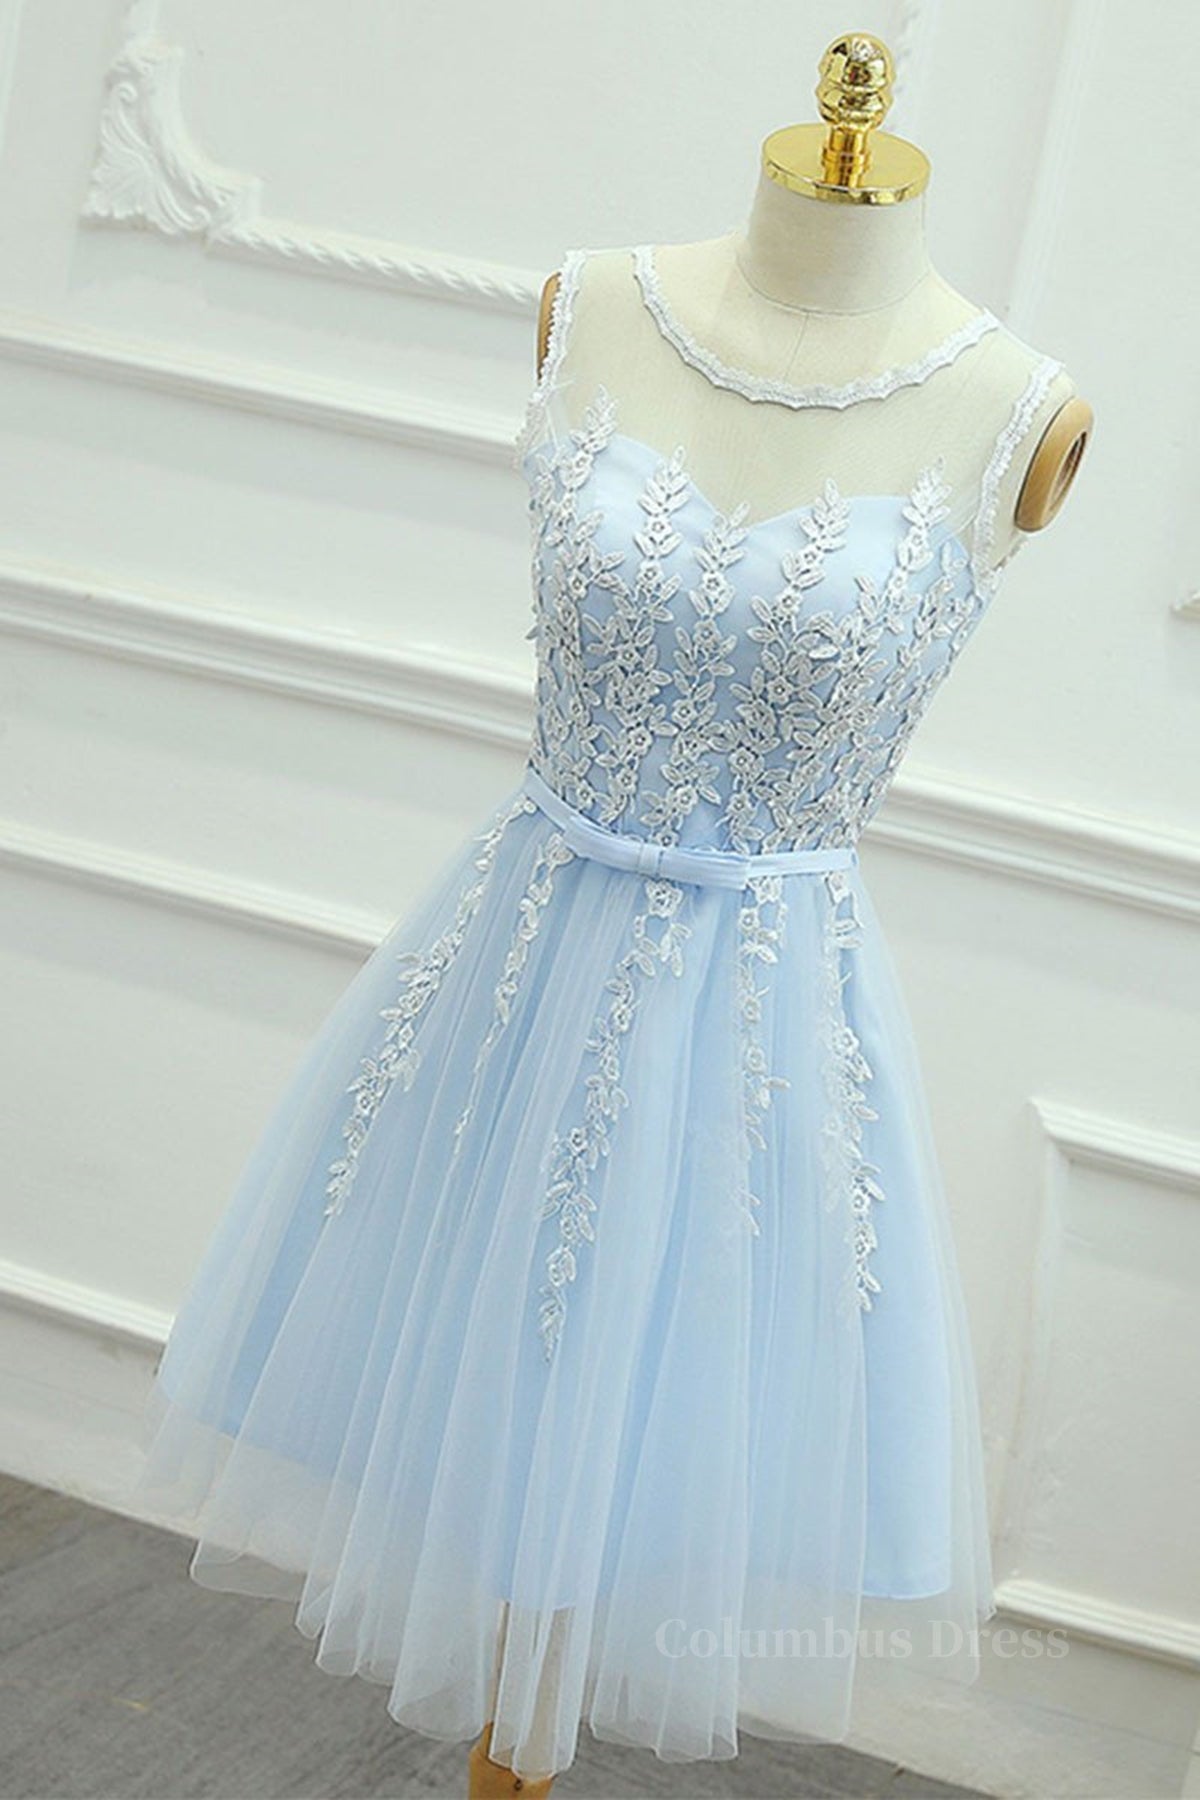 Round Neck Short Blue Lace Corset Prom Dresses, Short Blue Lace Corset Homecoming Graduation Dresses outfit, Party Dress Pattern